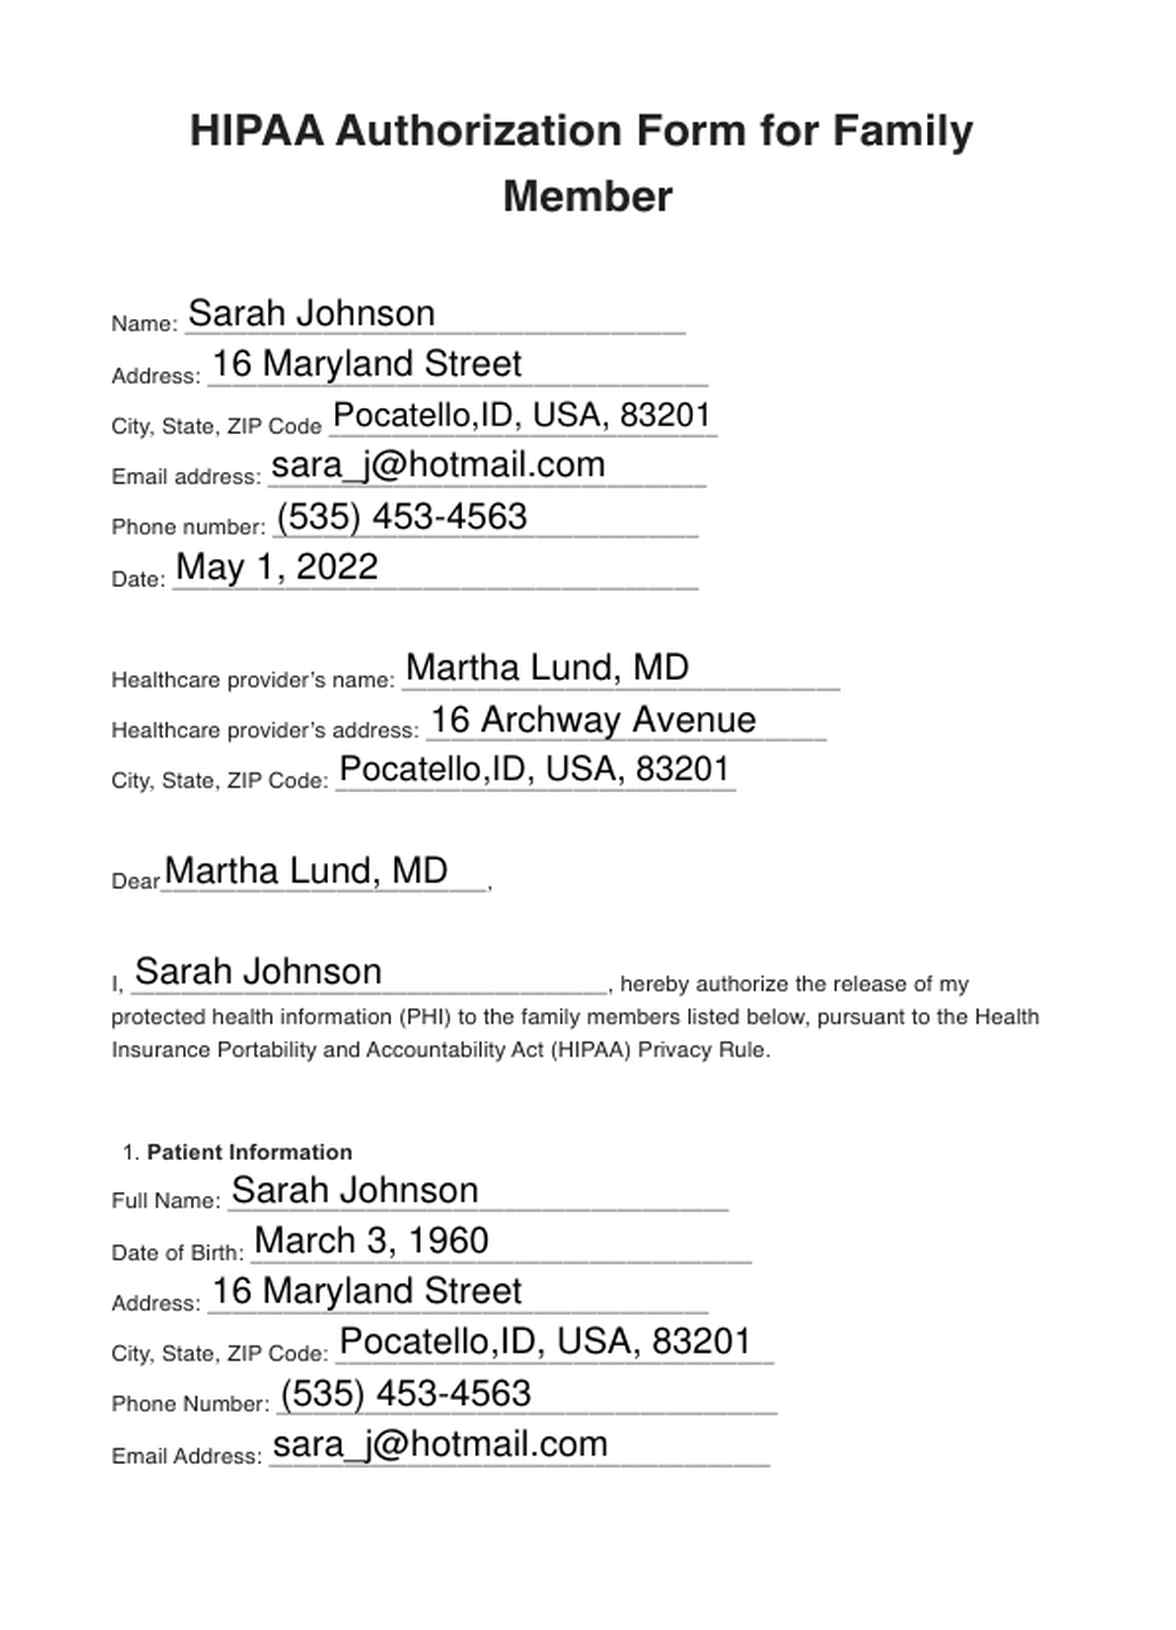 HIPAA Authorization Form For Family Members PDF Example